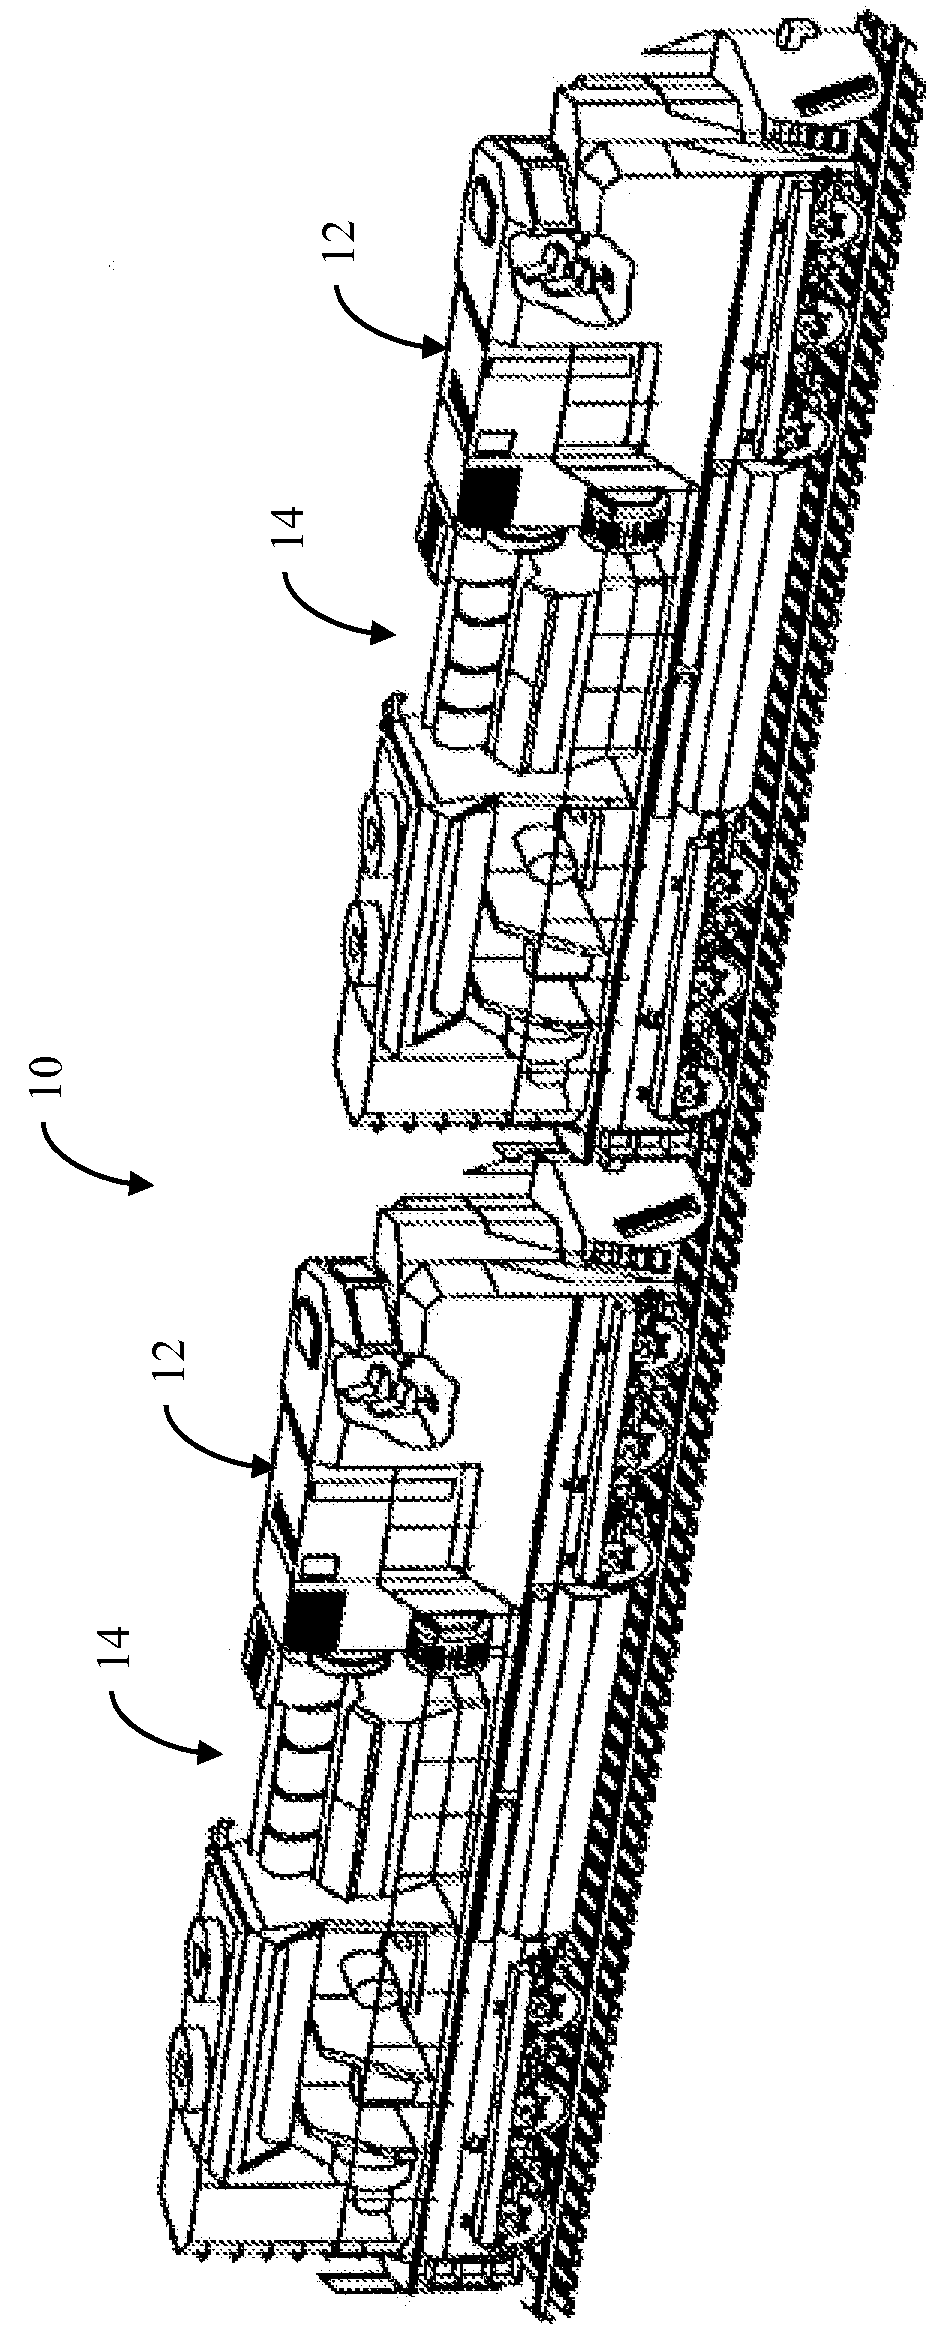 Connector device for electronic communication system